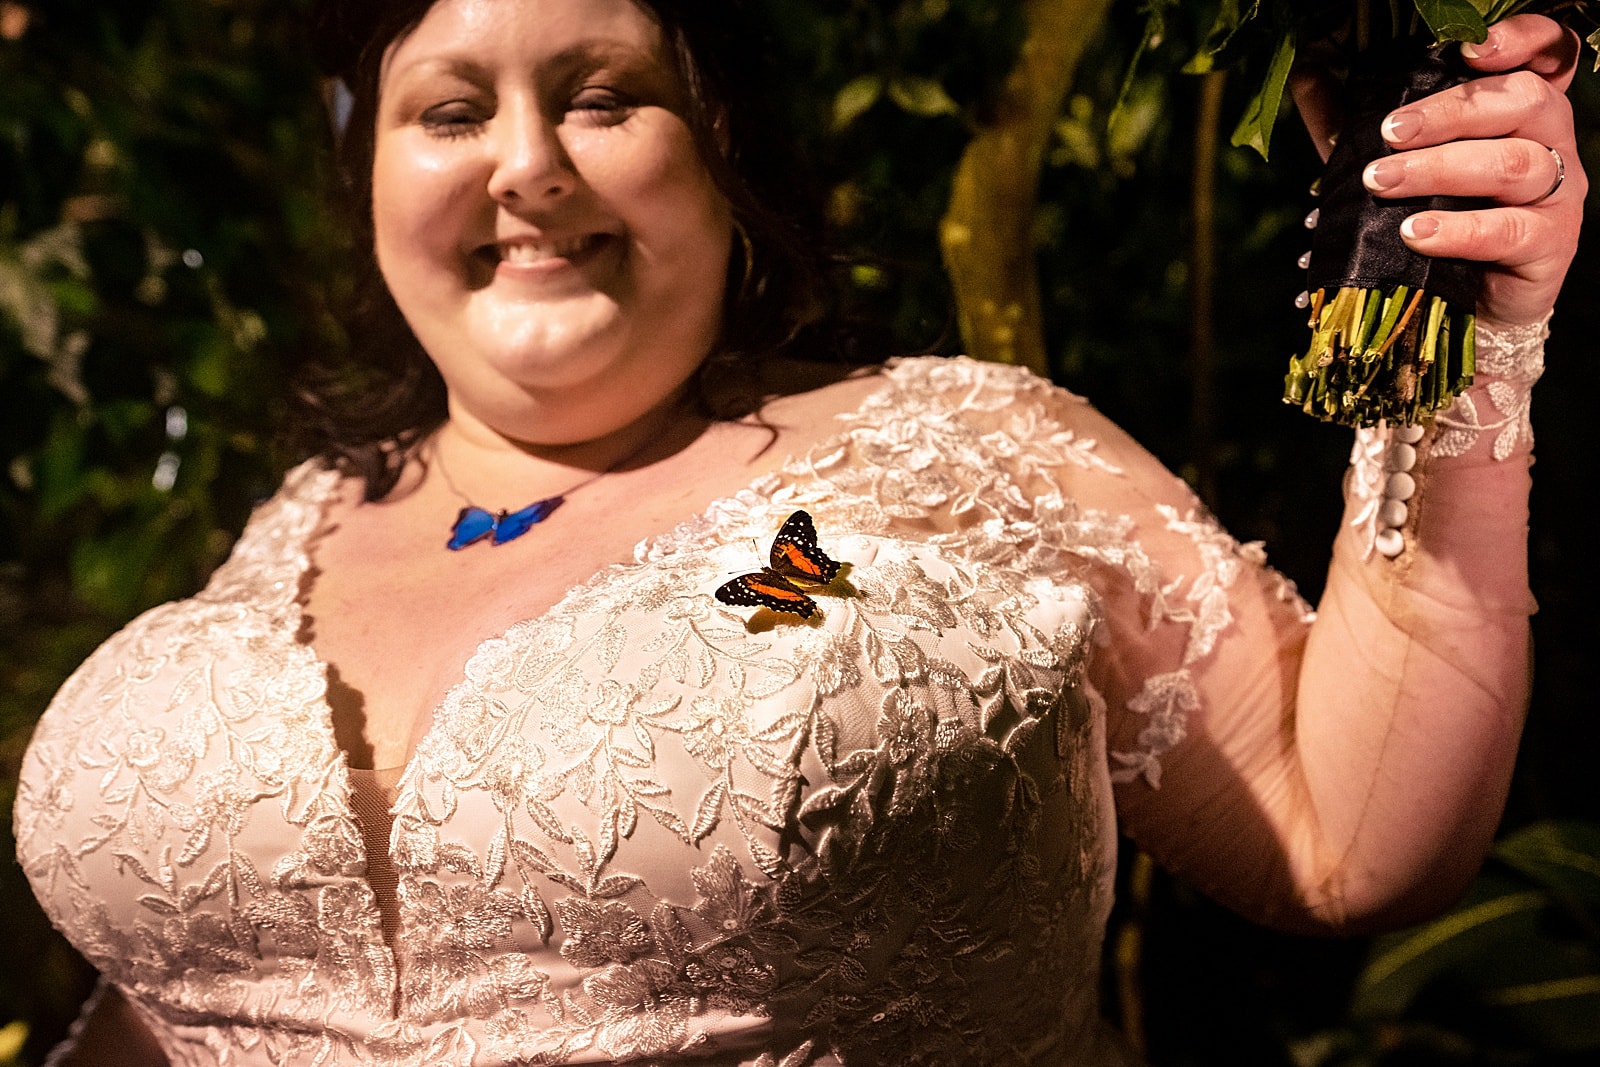 After their wedding ceremony at the Durham Museum of Life and Science, these brides went into the butterfly house to release butterflies!